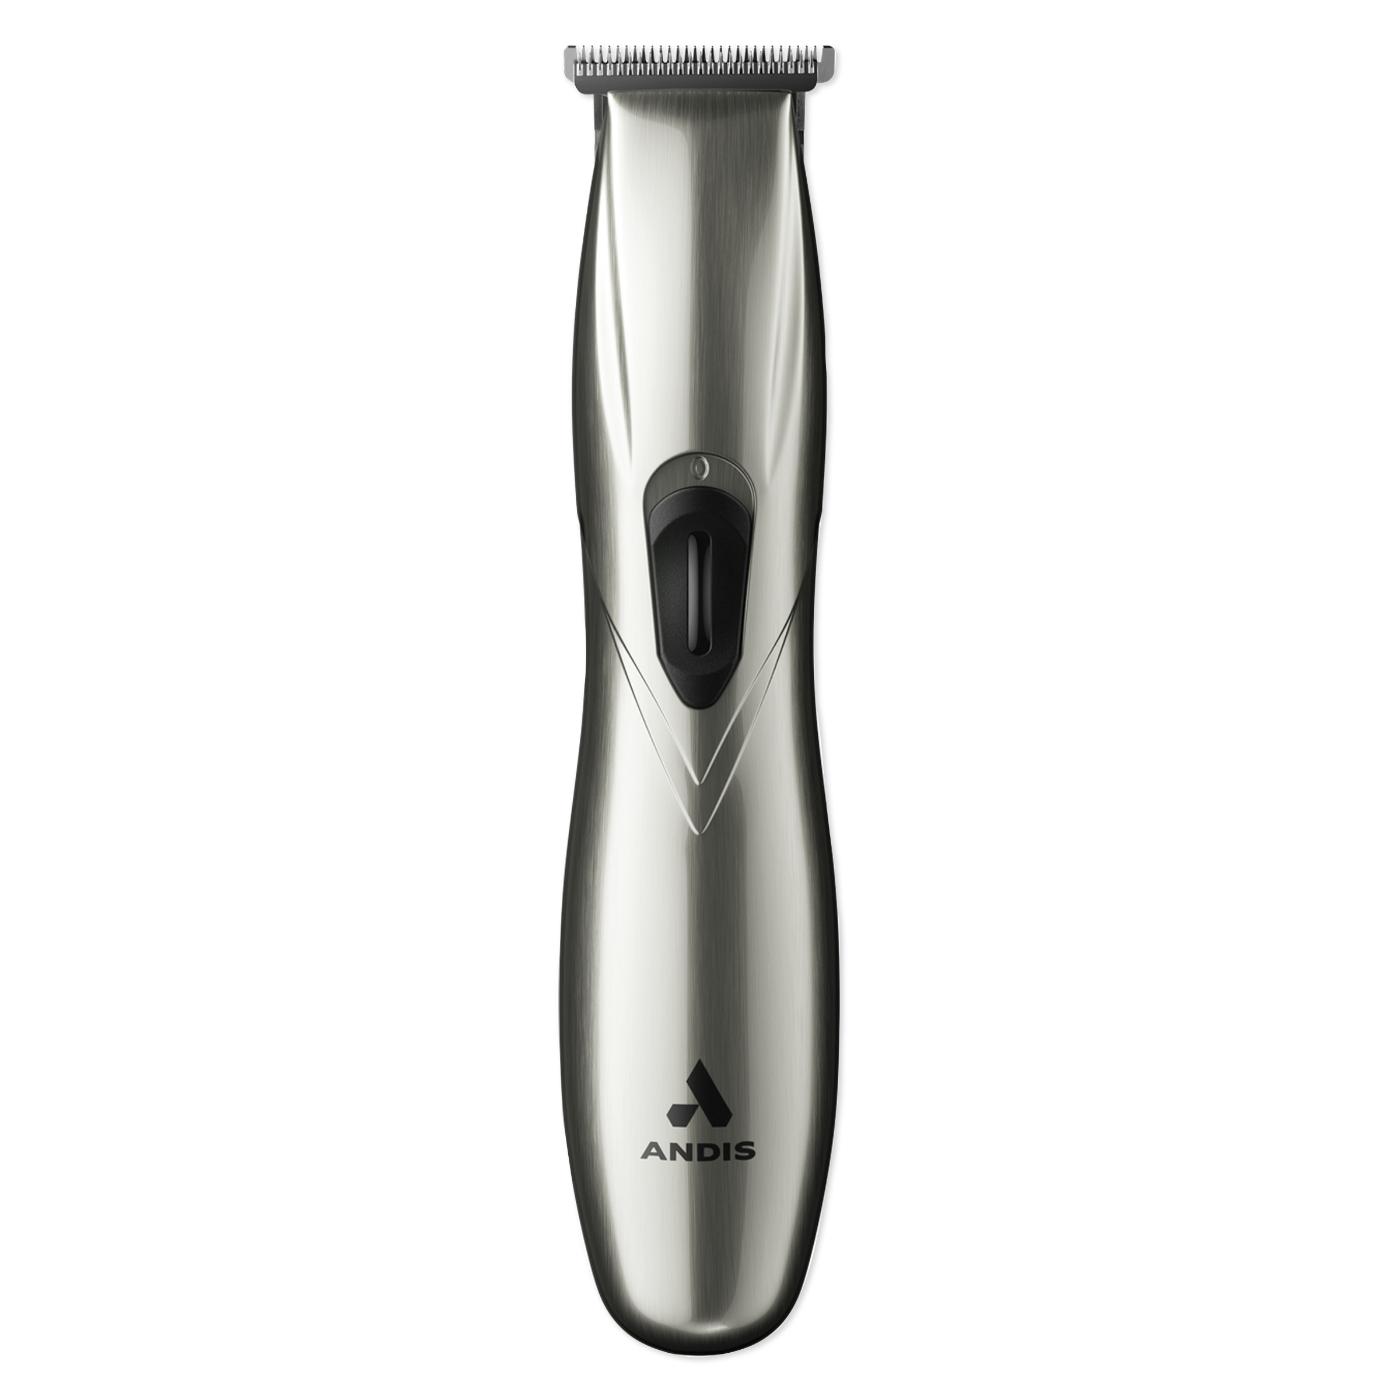 Andis lightweight trimmer is perfect for trimming necklines and light-duty touch-ups.